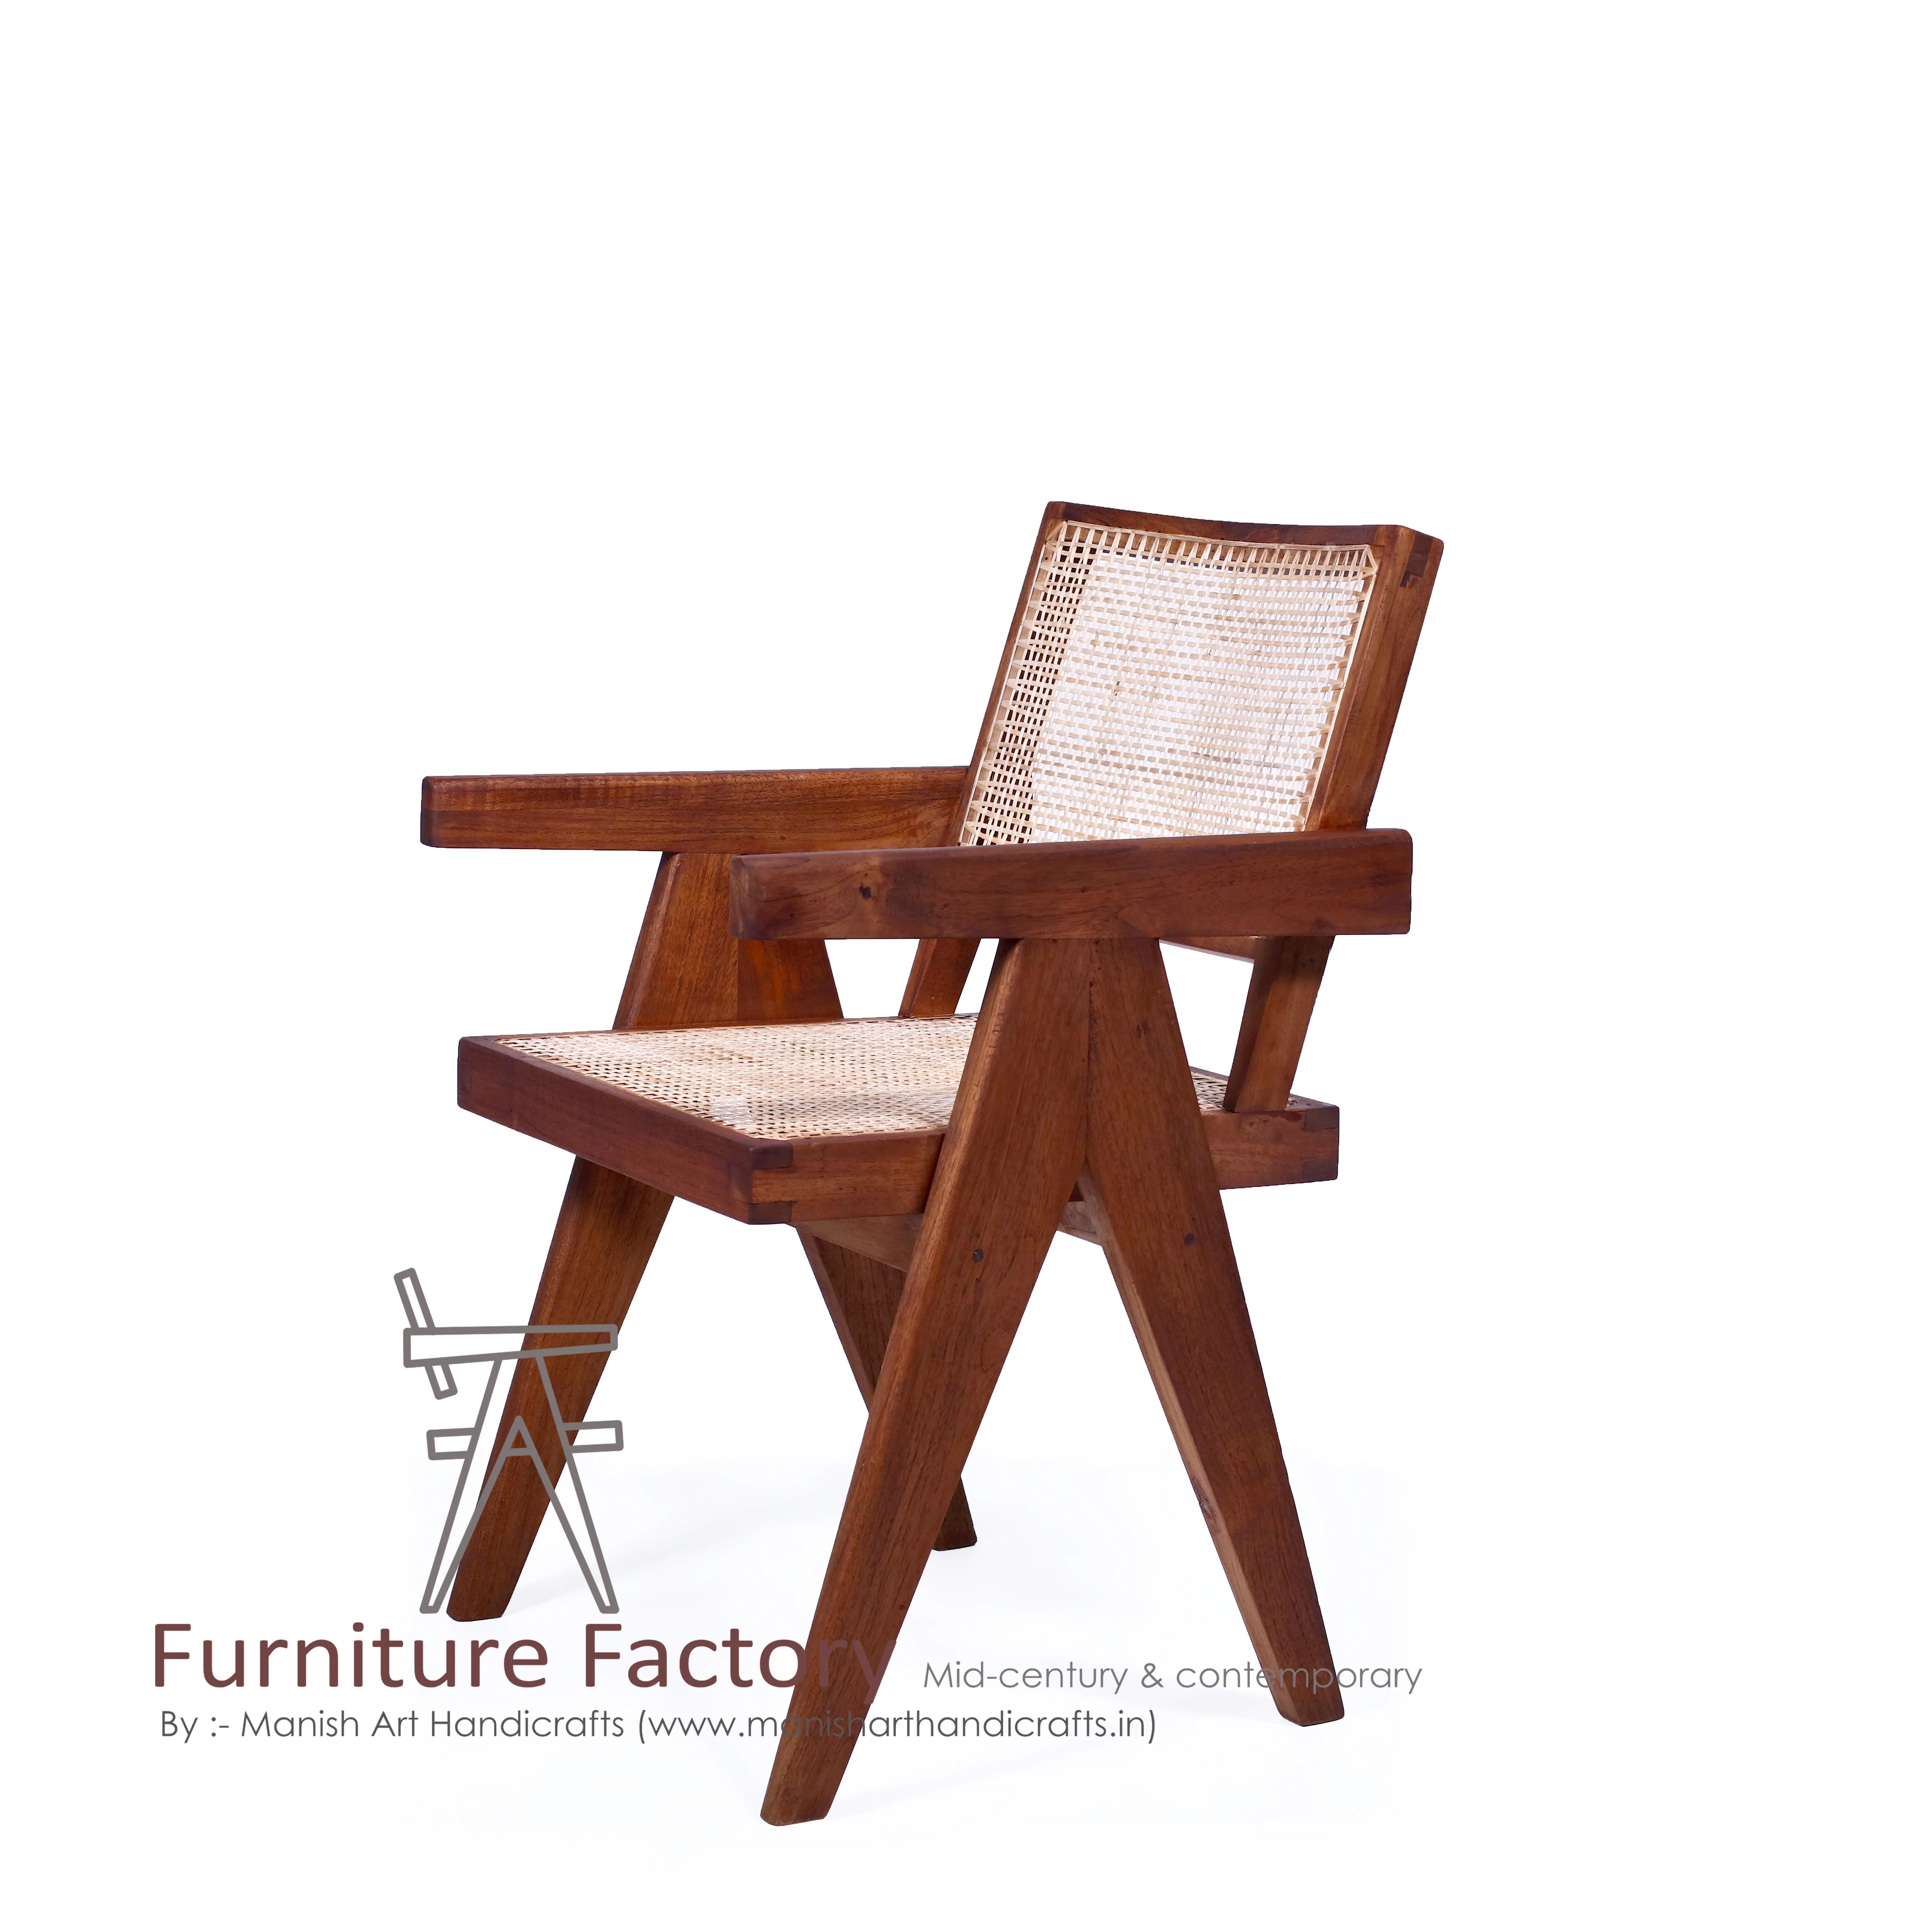 Replica Of Pierre Jeanneret Office Chair Or Dining Chair High Quality Teak Wood And Natural Rattan Buy Pierre Jeanneret Numbered Teak Conference Chair From Chandigarh India Replica Le Corbusier Pierre Jeanneret